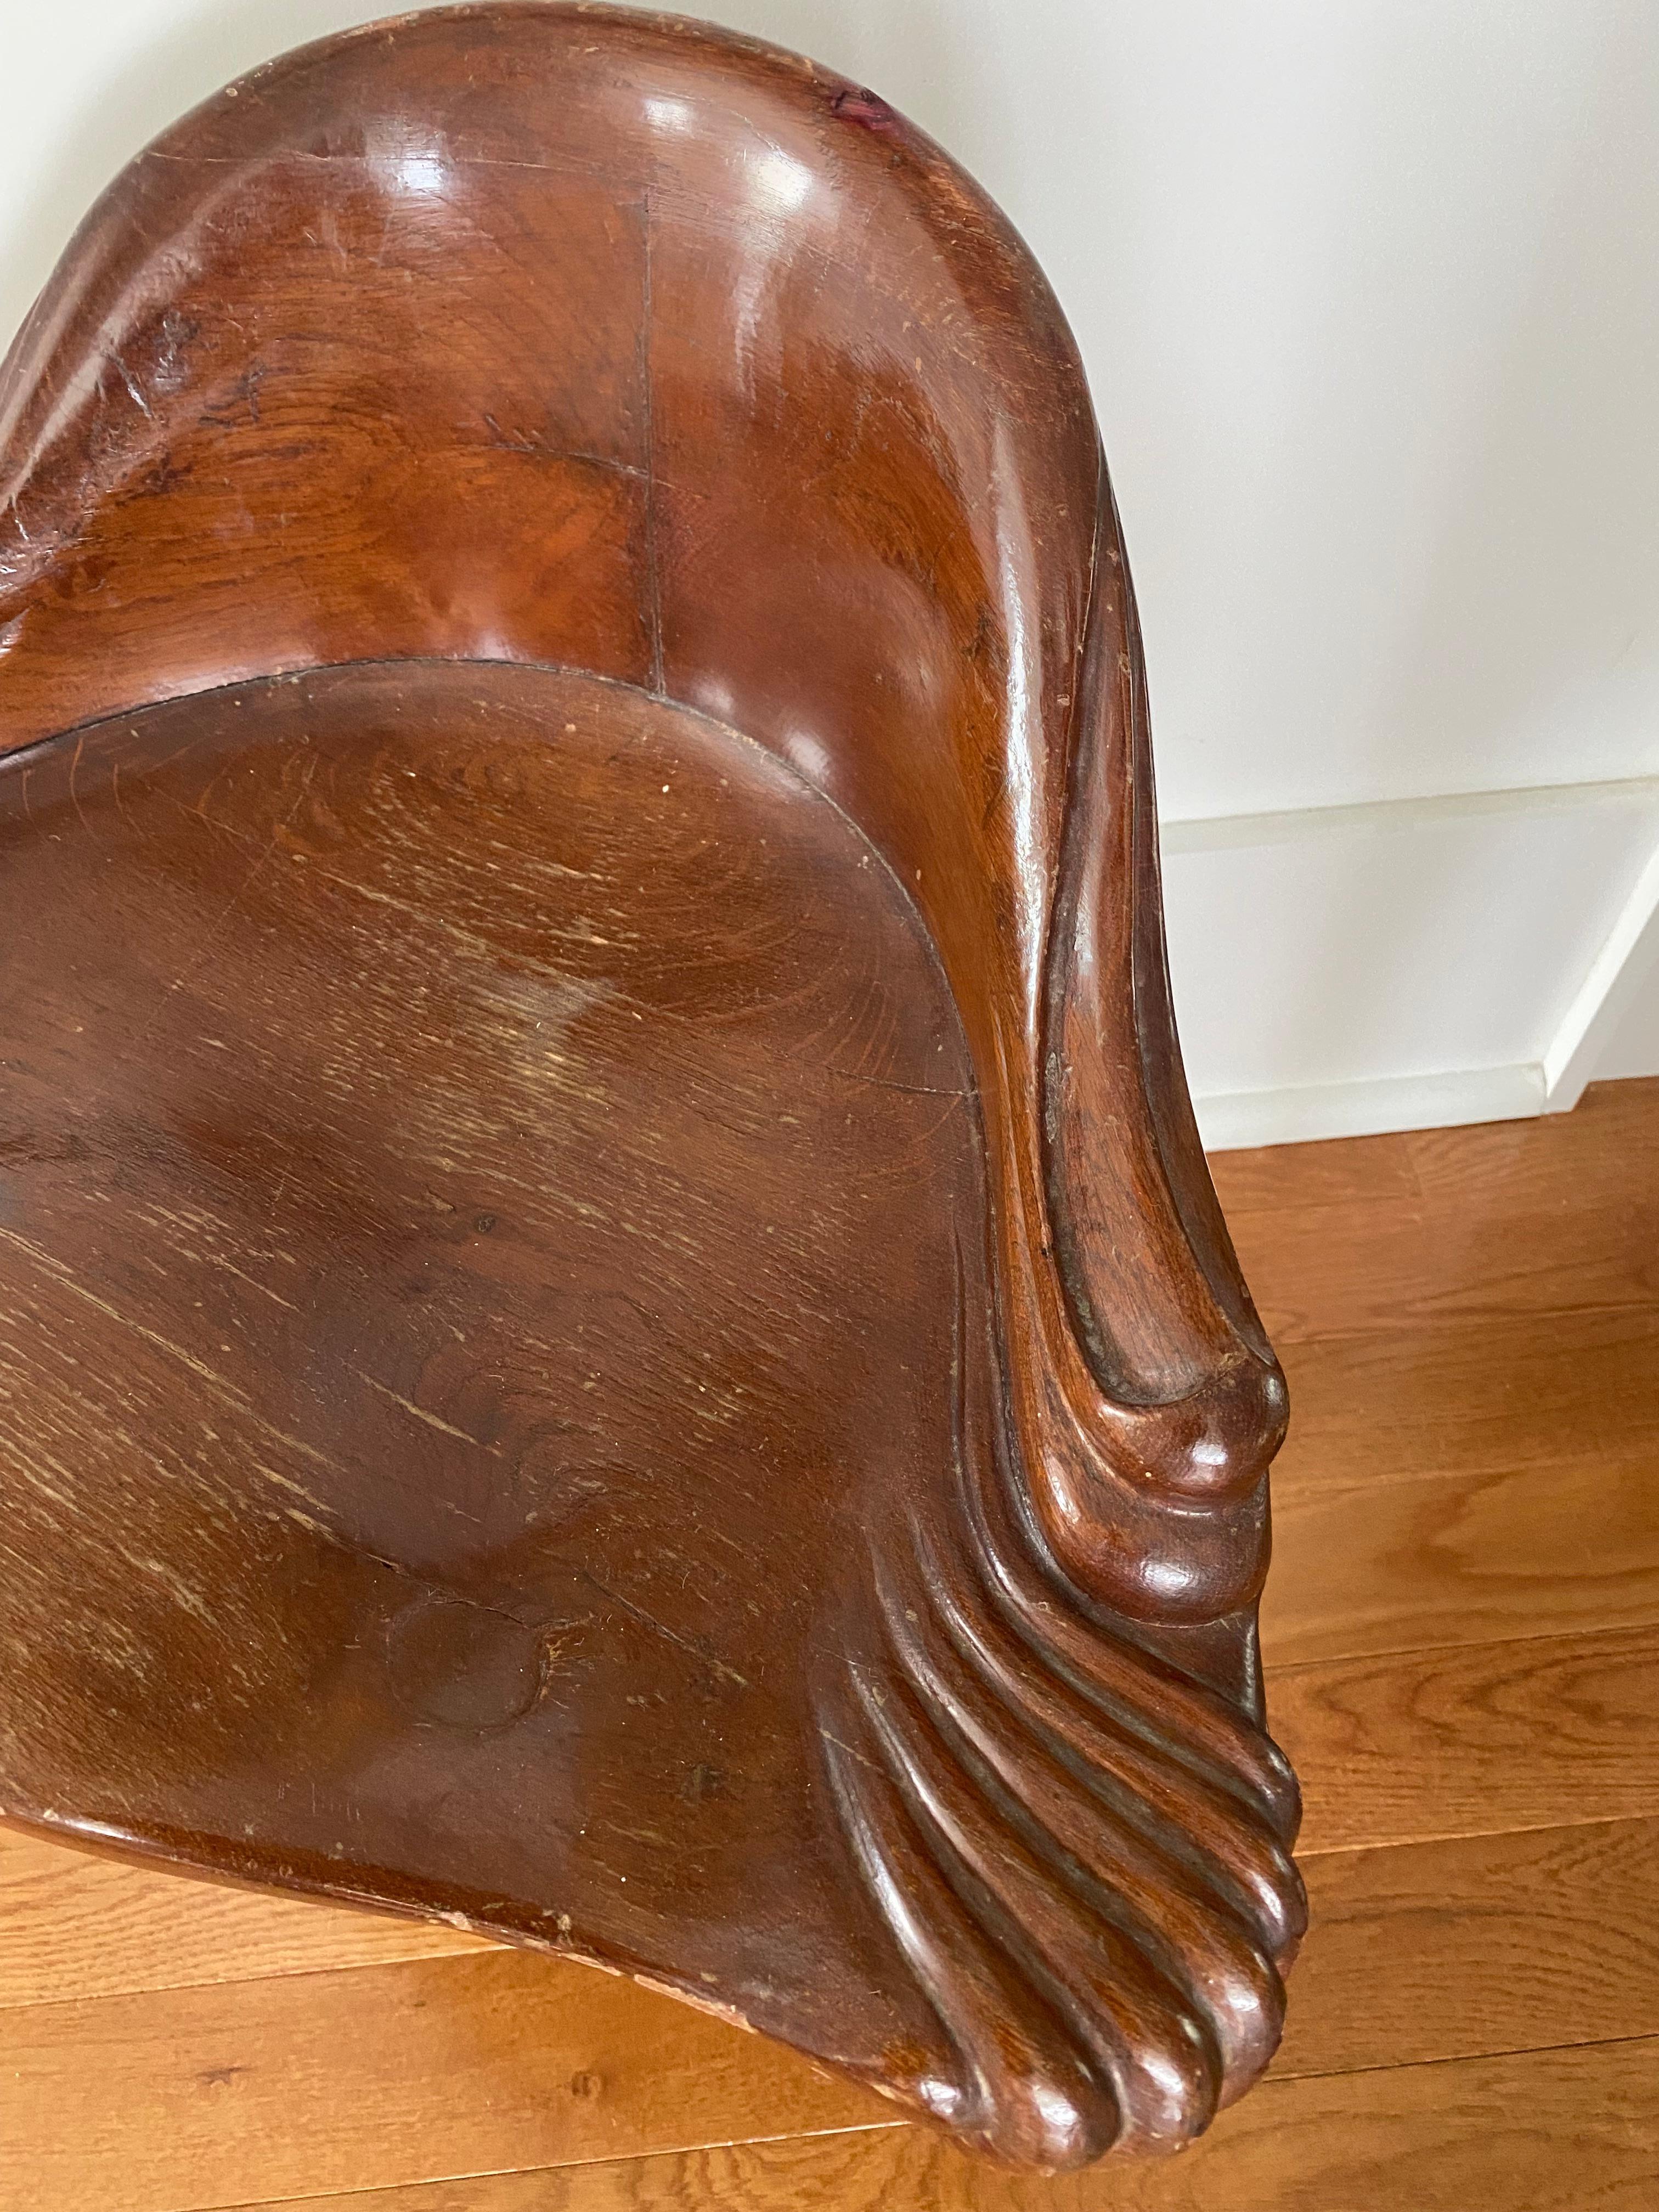 Corner chair by Antoni Gaudi for Casa Calvet during Barcelona's Art Nouveau period. Designed in during the turn of the 20th century 1898-1900.

BD Barcelona has re edited Gaudi furnishings since the 1970s.

Heavy solid wood - mahogany.